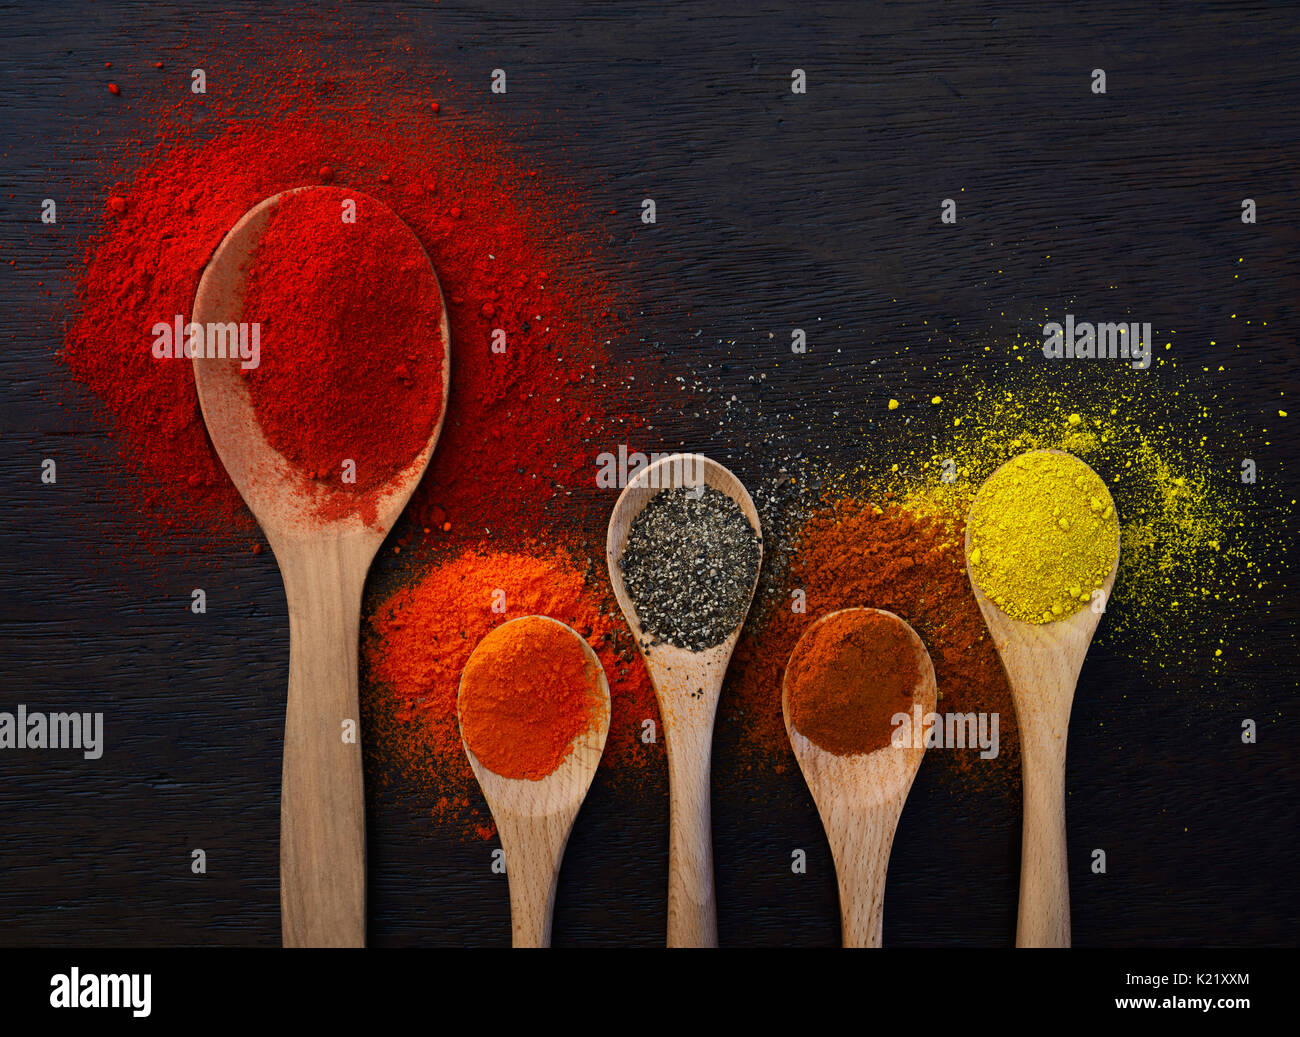 Wooden spoon filled with powders and ground spices Stock Photo